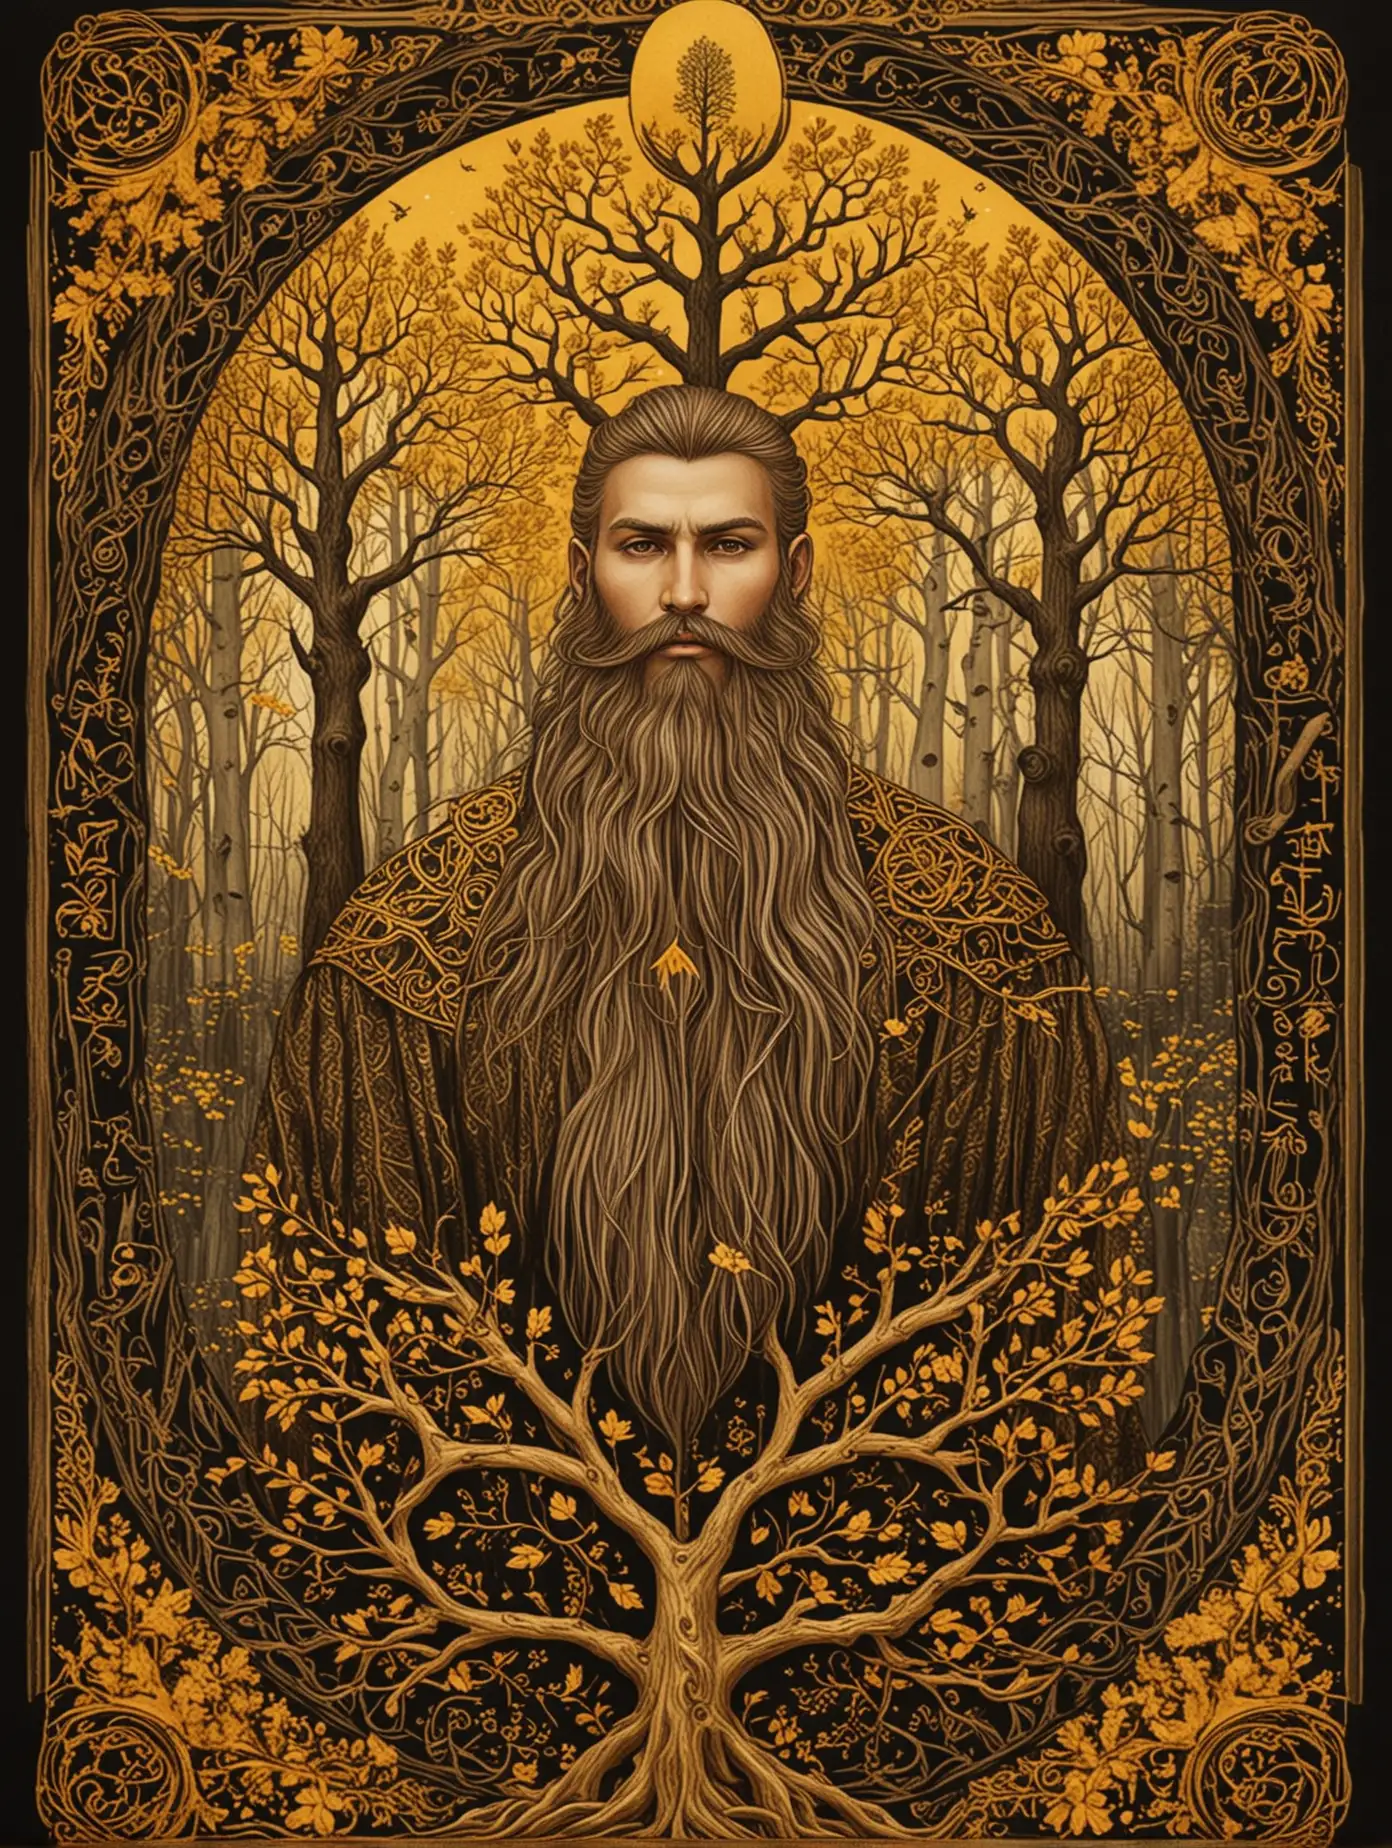 Slavic-Style-Tarot-Card-with-Strong-Man-and-Golden-Tree